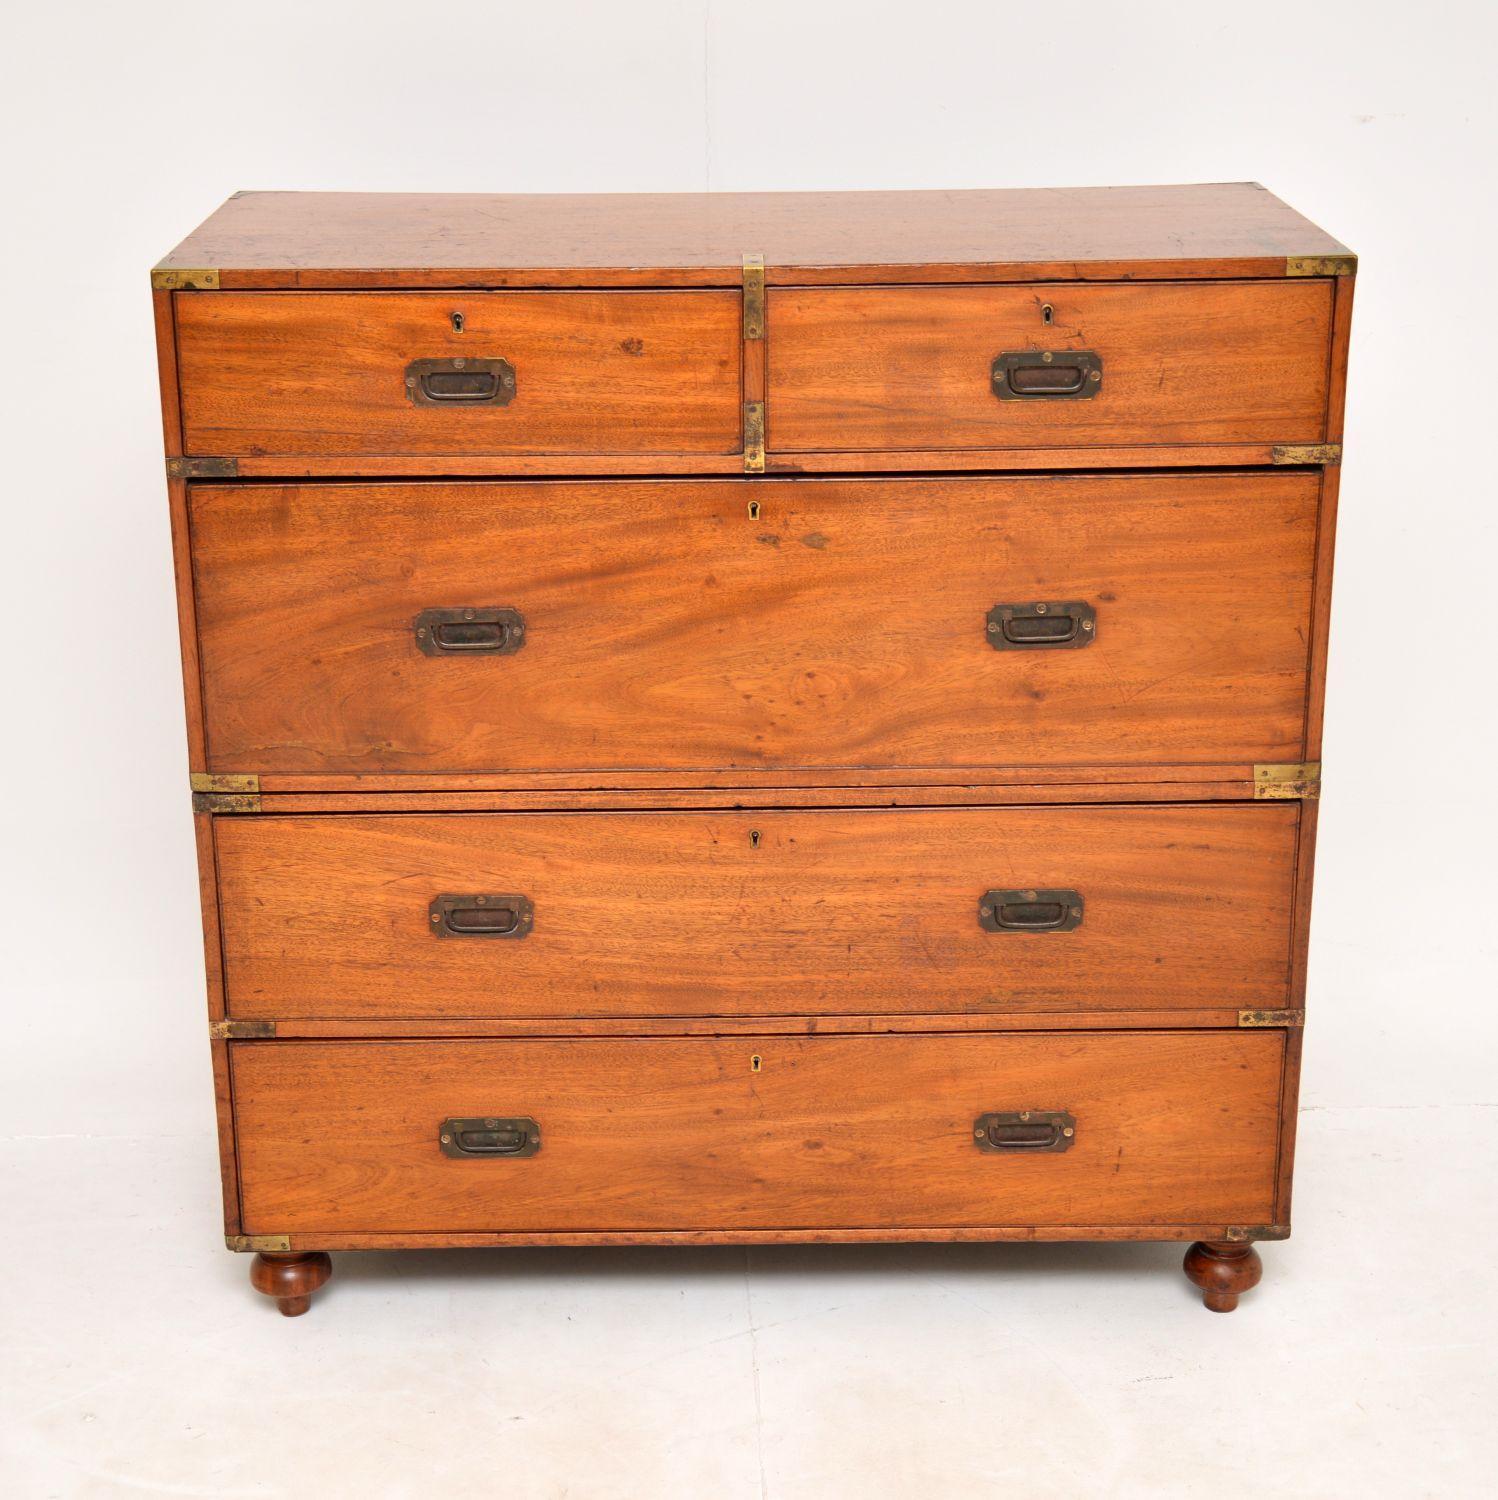 An excellent original antique Victorian military campaign chest of drawers in teak. This was made in England, it dates from around the 1860-70’s.
It is a great size and is a very useful item. It comes apart in two main pieces, with brass carry